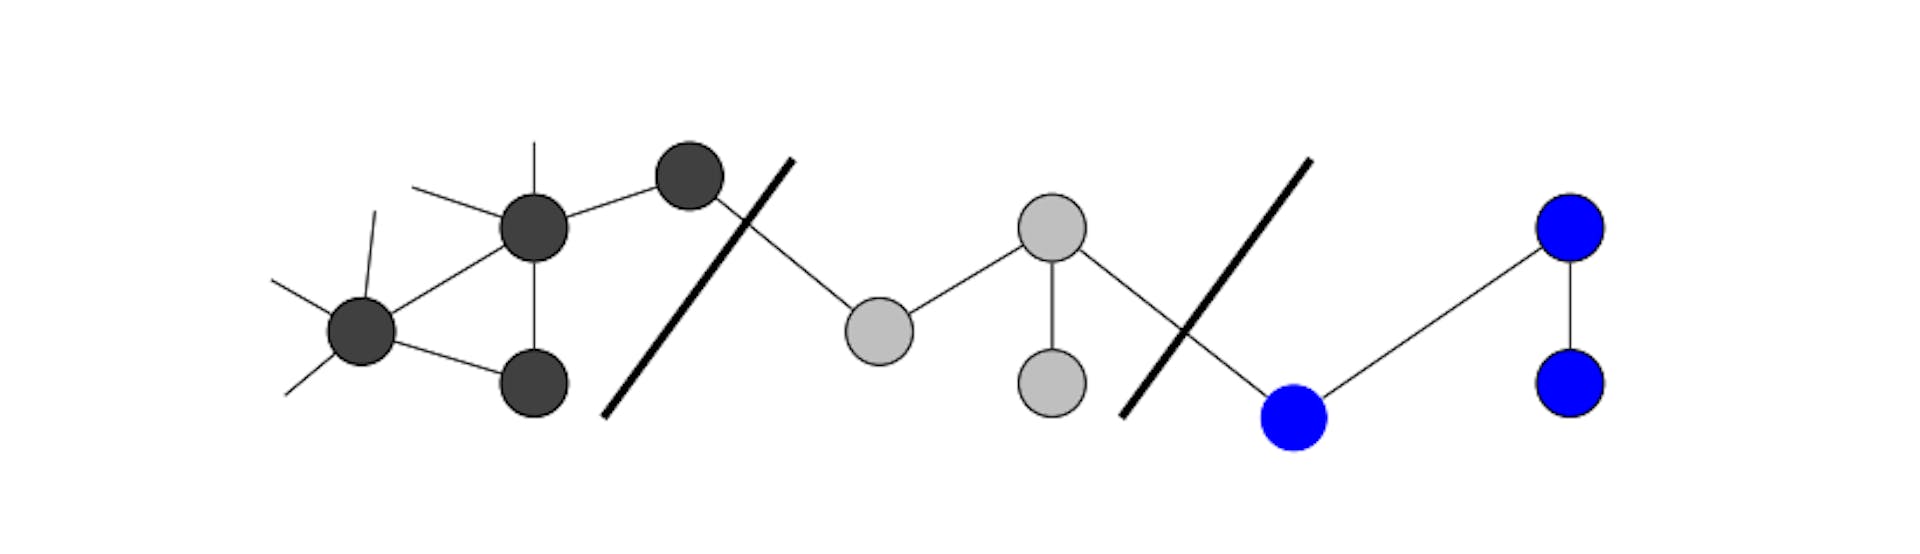 Figure 1: Example of clustering design with a single network. The network is partitioned into three clusters. Elements in a given cluster are assigned the same color.